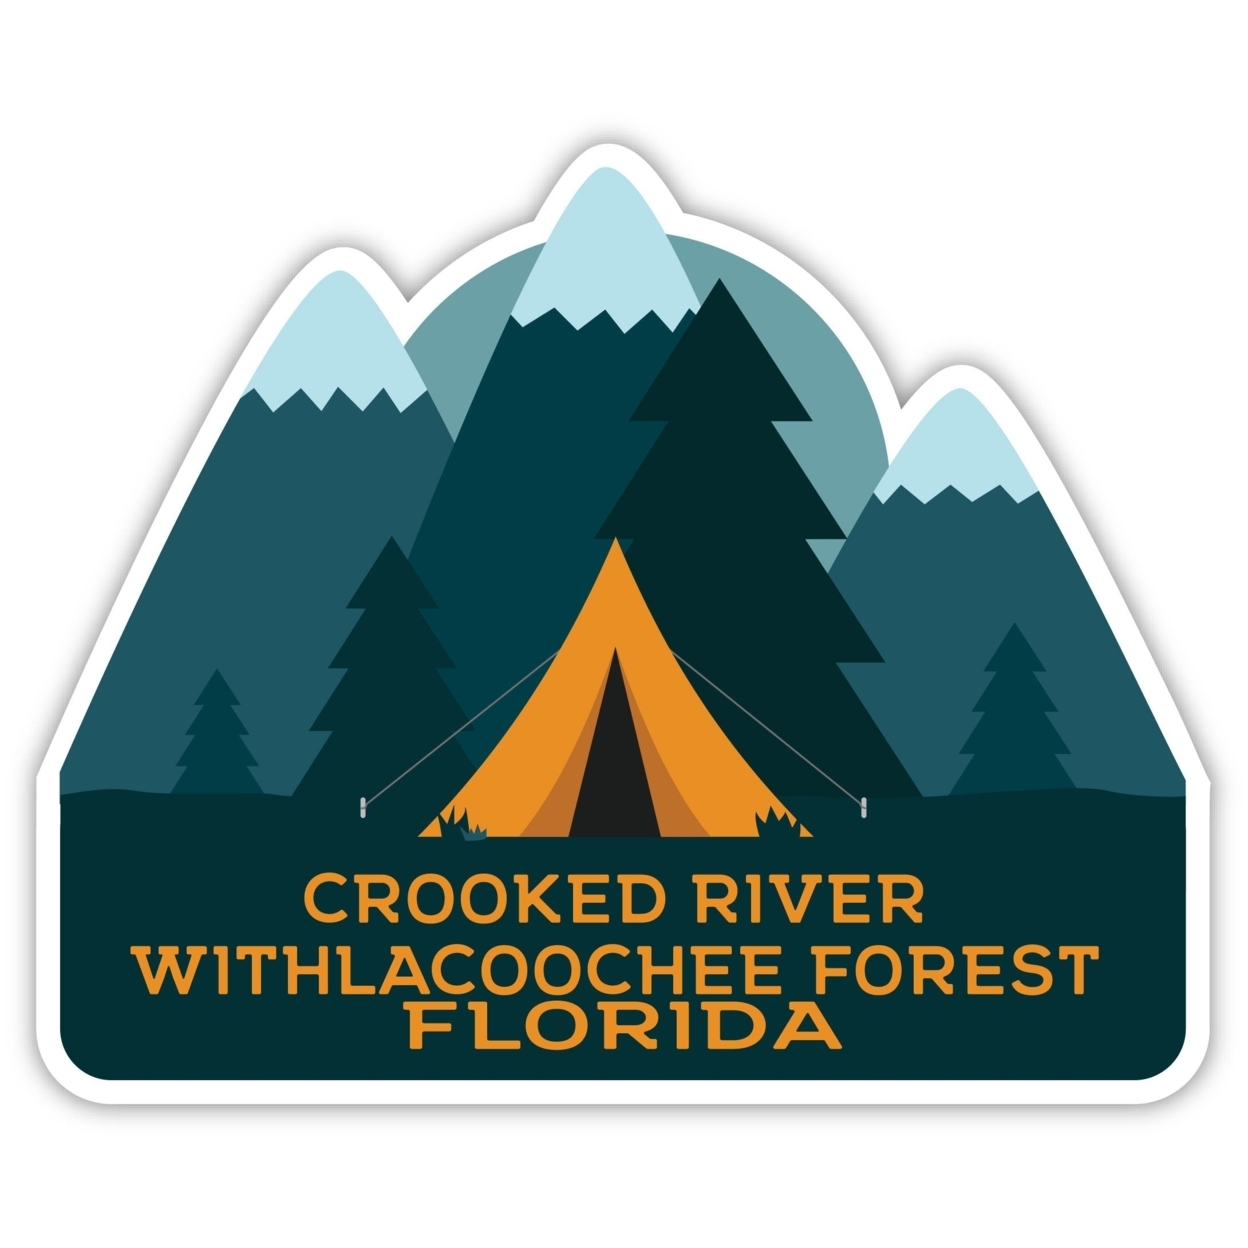 Crooked River Withlacoochee Forest Florida Souvenir Decorative Stickers (Choose Theme And Size) - Single Unit, 4-Inch, Tent